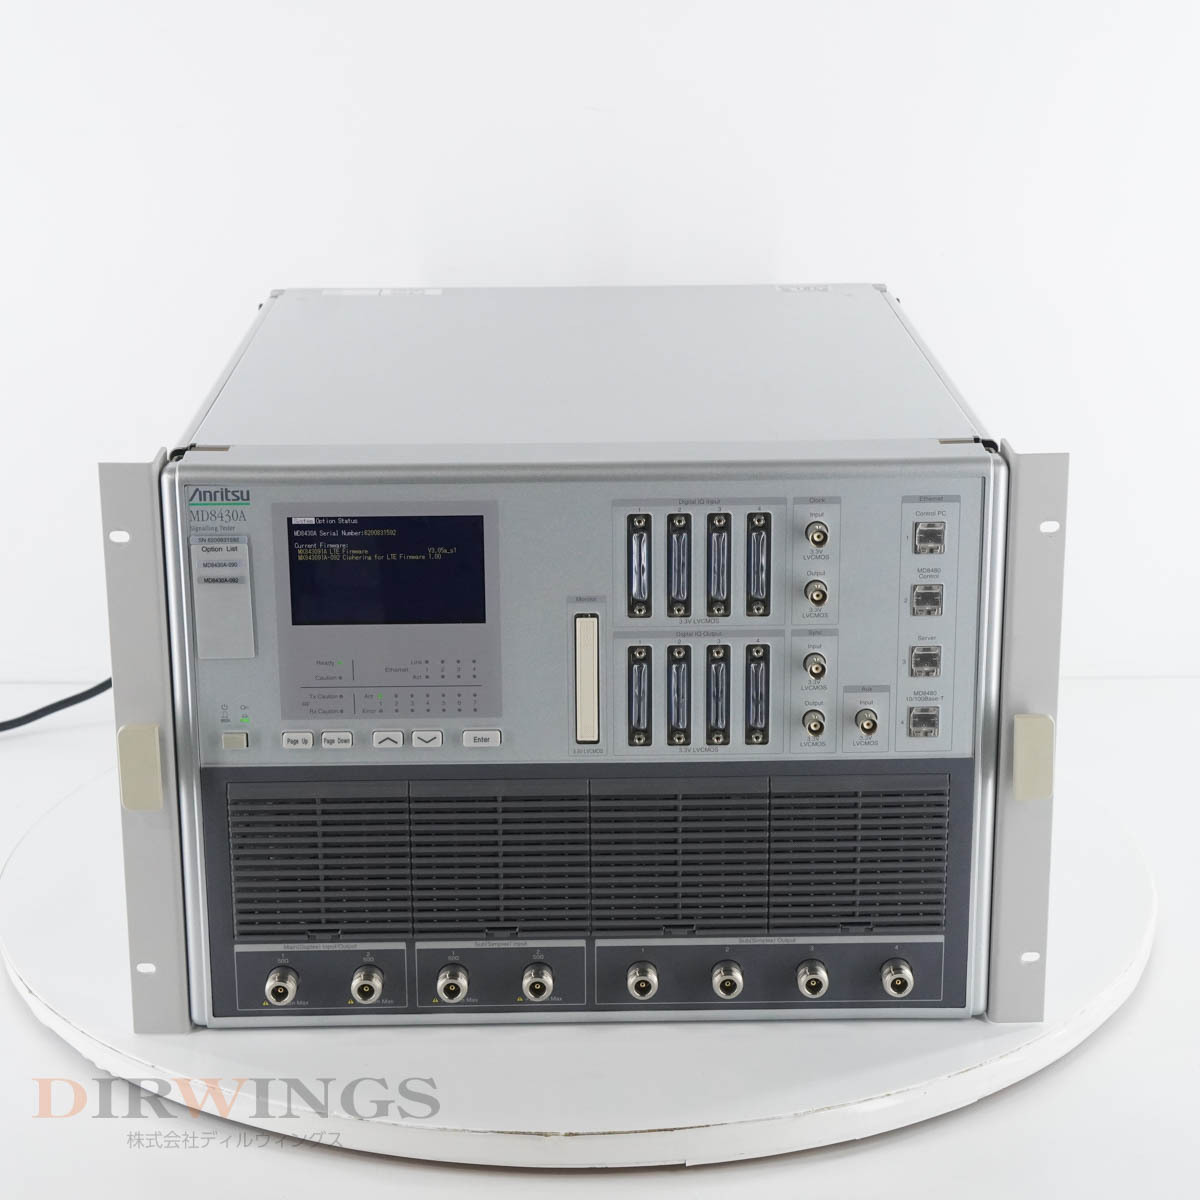 [DW] 8 day guarantee MD8430A Anritsu OPT 090 092 Anne litsuSignalling Testersigna ring tester basis ground department simulator [05899-0054]